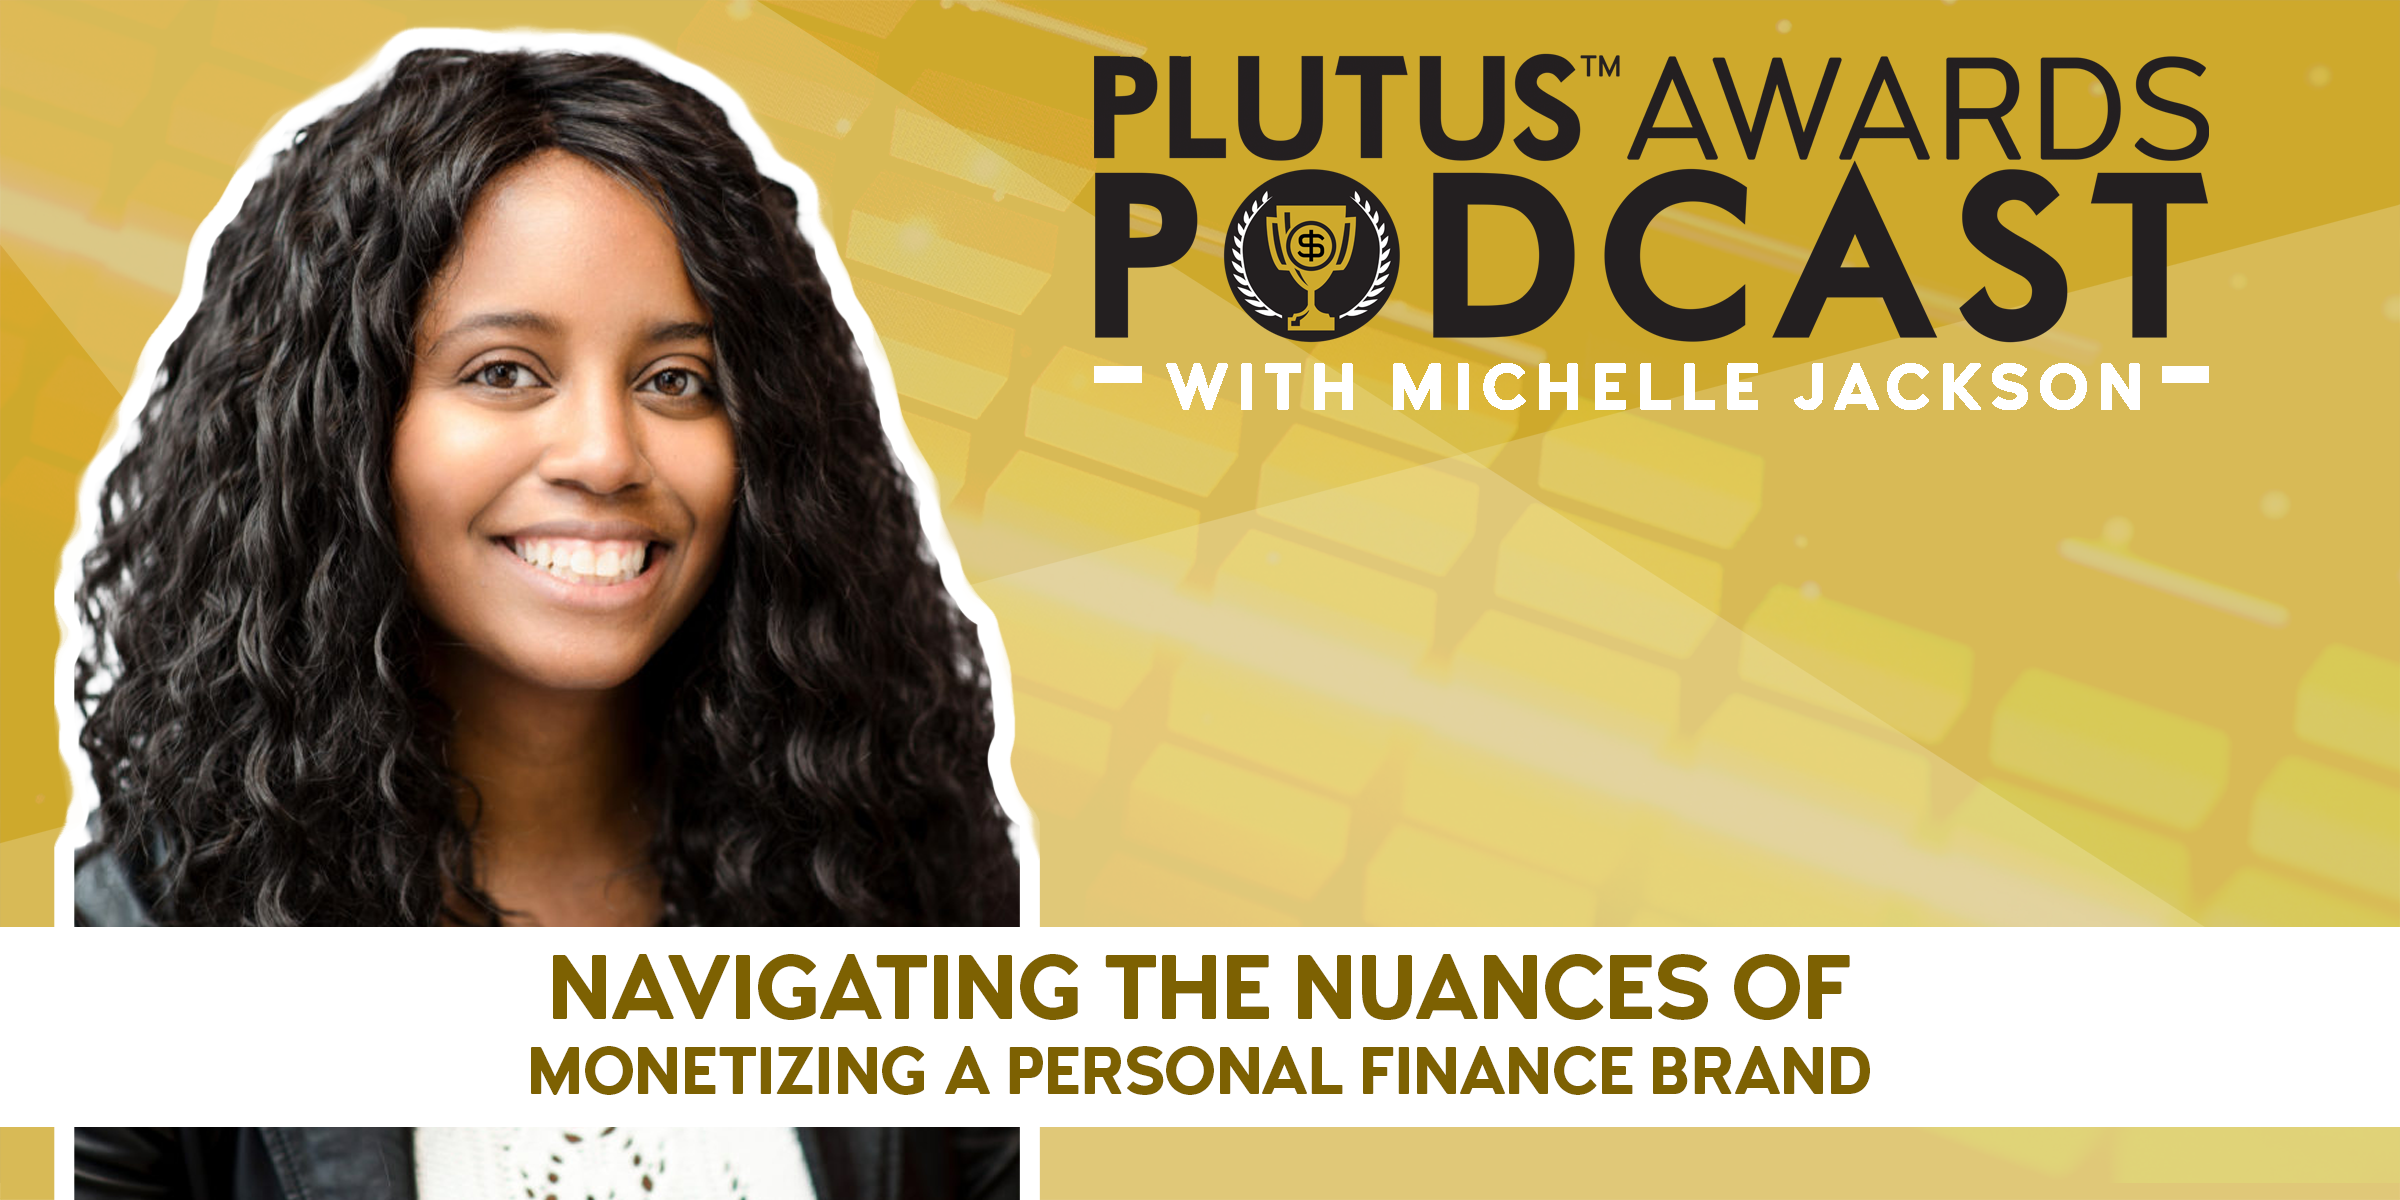 Michelle Jackson - Plutus Awards Podcast Cover